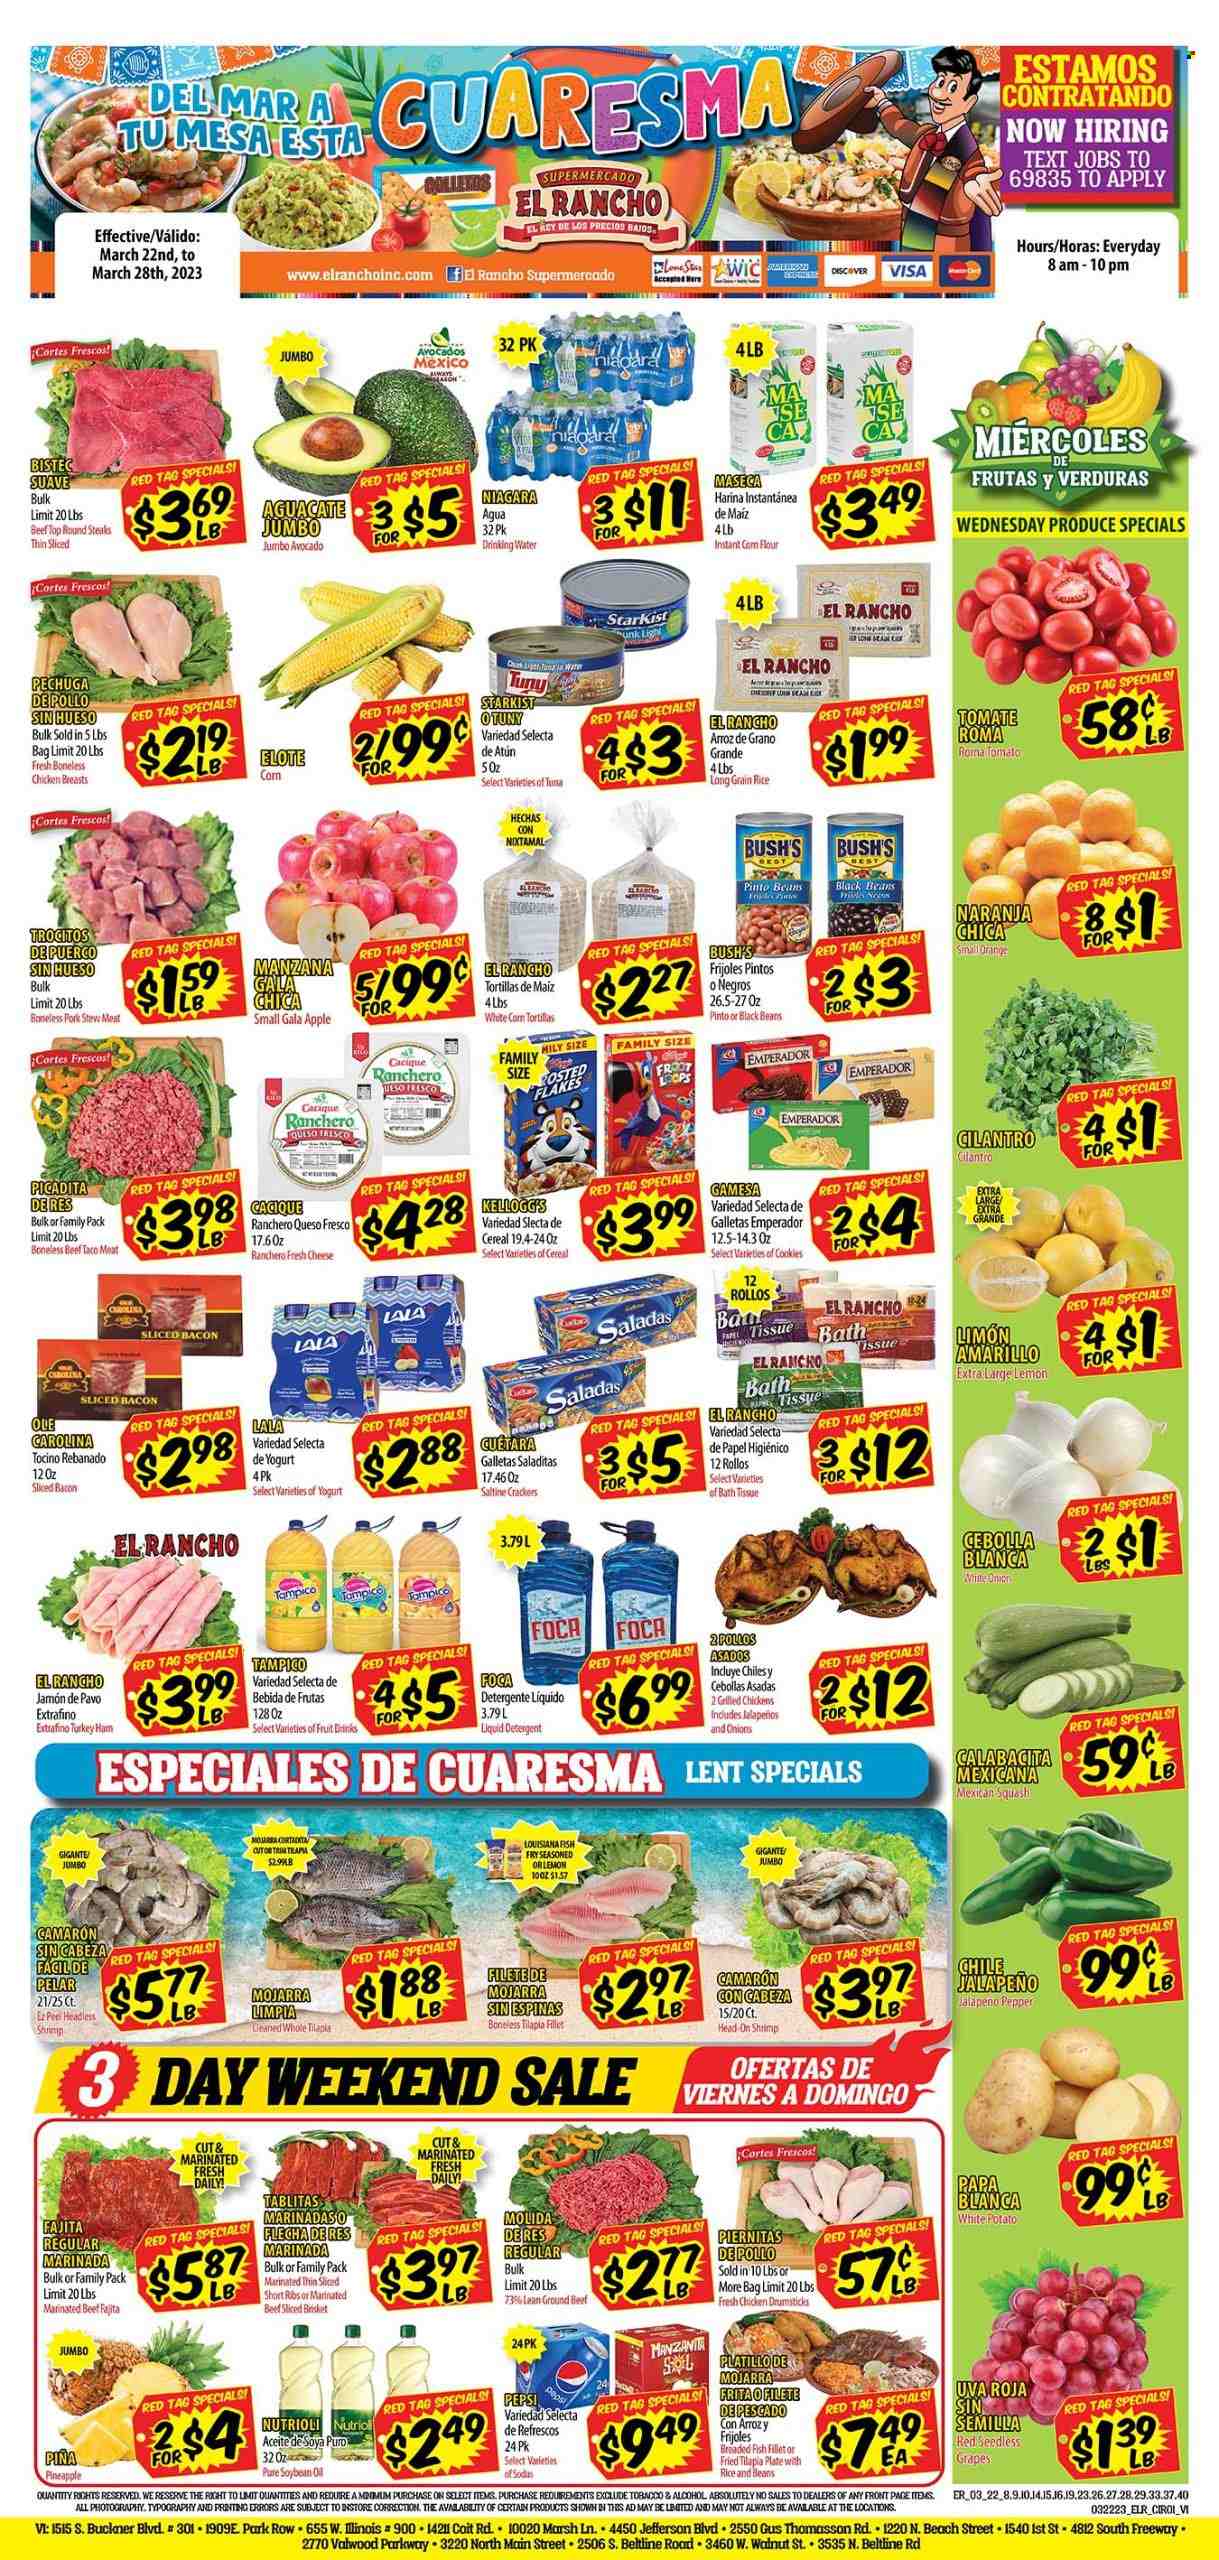 thumbnail - El Rancho Flyer - 03/22/2023 - 03/28/2023 - Sales products - stew meat, corn tortillas, tortillas, beans, tomatoes, jalapeño, mexican squash, avocado, Gala, grapes, seedless grapes, pineapple, oranges, fish fillets, tilapia, tuna, fish, shrimps, StarKist, fried fish, fajita, breaded fish, brisket, bacon, ham, queso fresco, cheese, yoghurt, potato fries, cookies, crackers, Kellogg's, black beans, pinto beans, cereals, long grain rice, cilantro, pepper, soya oil, oil, Pepsi, fruit punch, water, alcohol, Sol, chicken drumsticks, chicken, beef meat, beef ribs, ground beef, steak, marinated beef, ribs. Page 1.